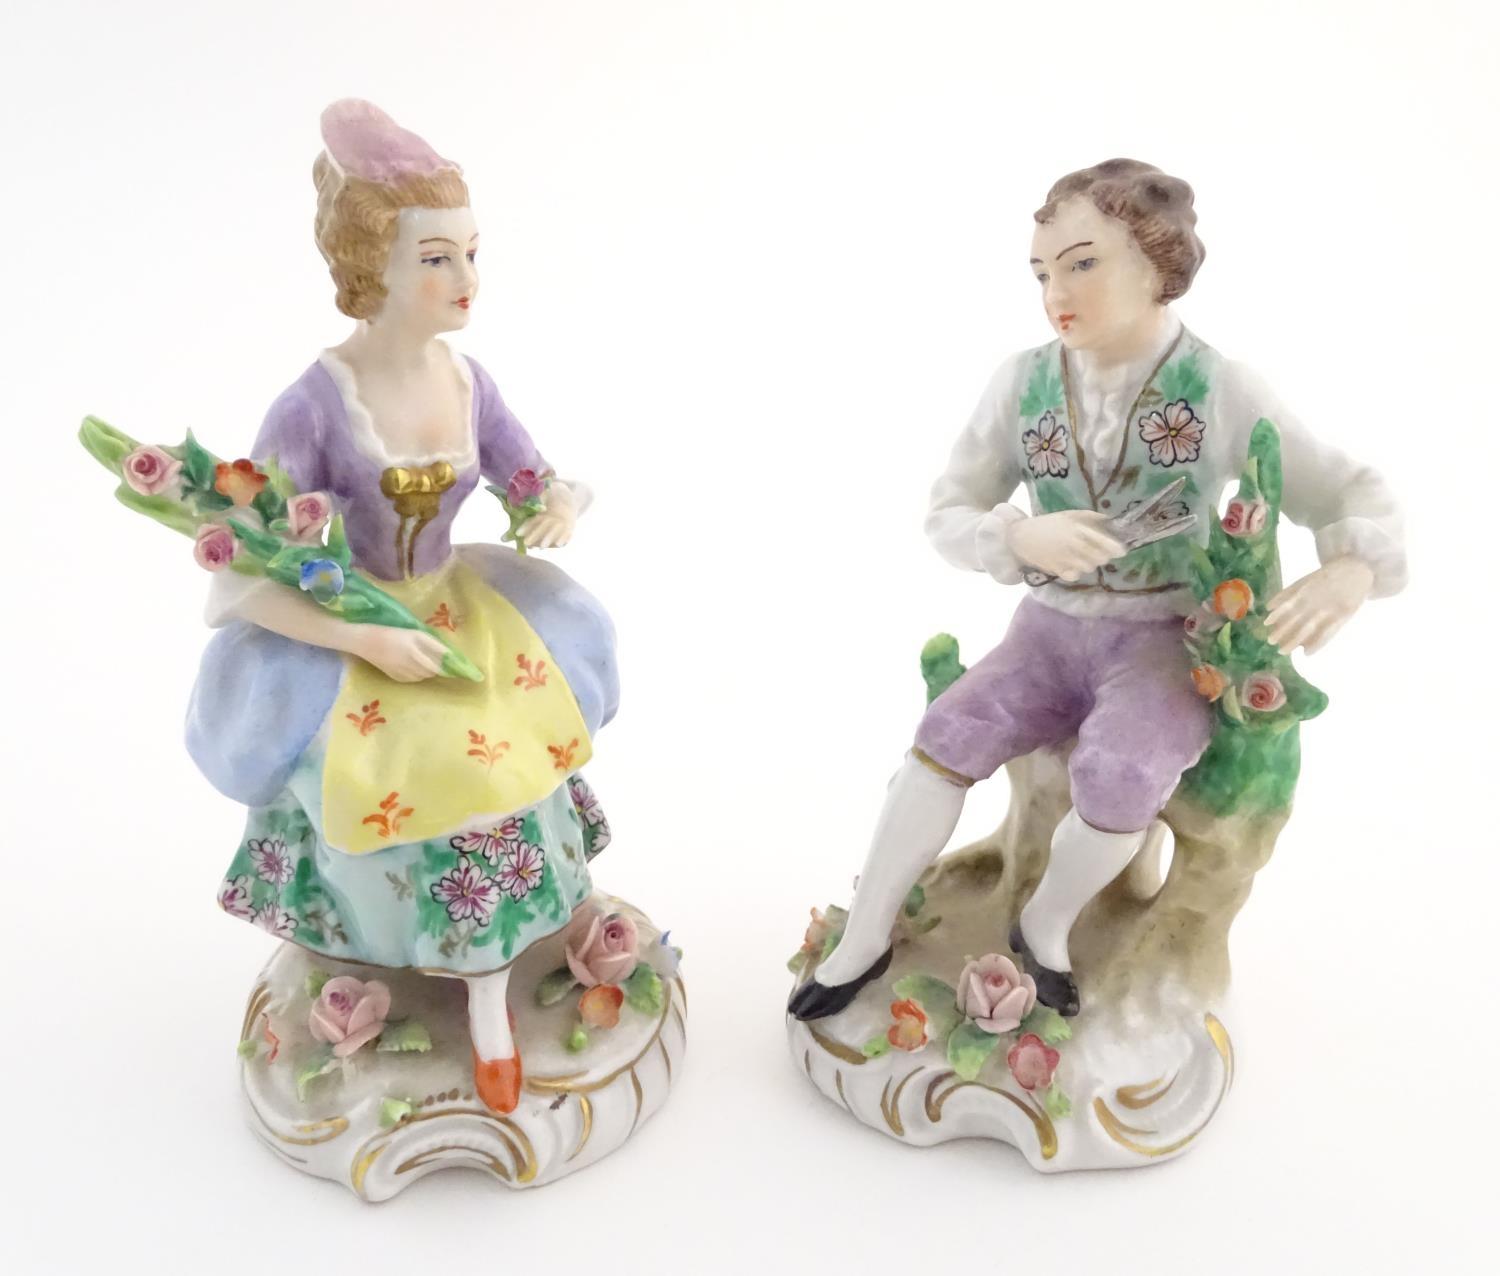 A pair of German Sitzendorf porcelain florist figures, a gentleman and lady, each seated on a - Image 6 of 20